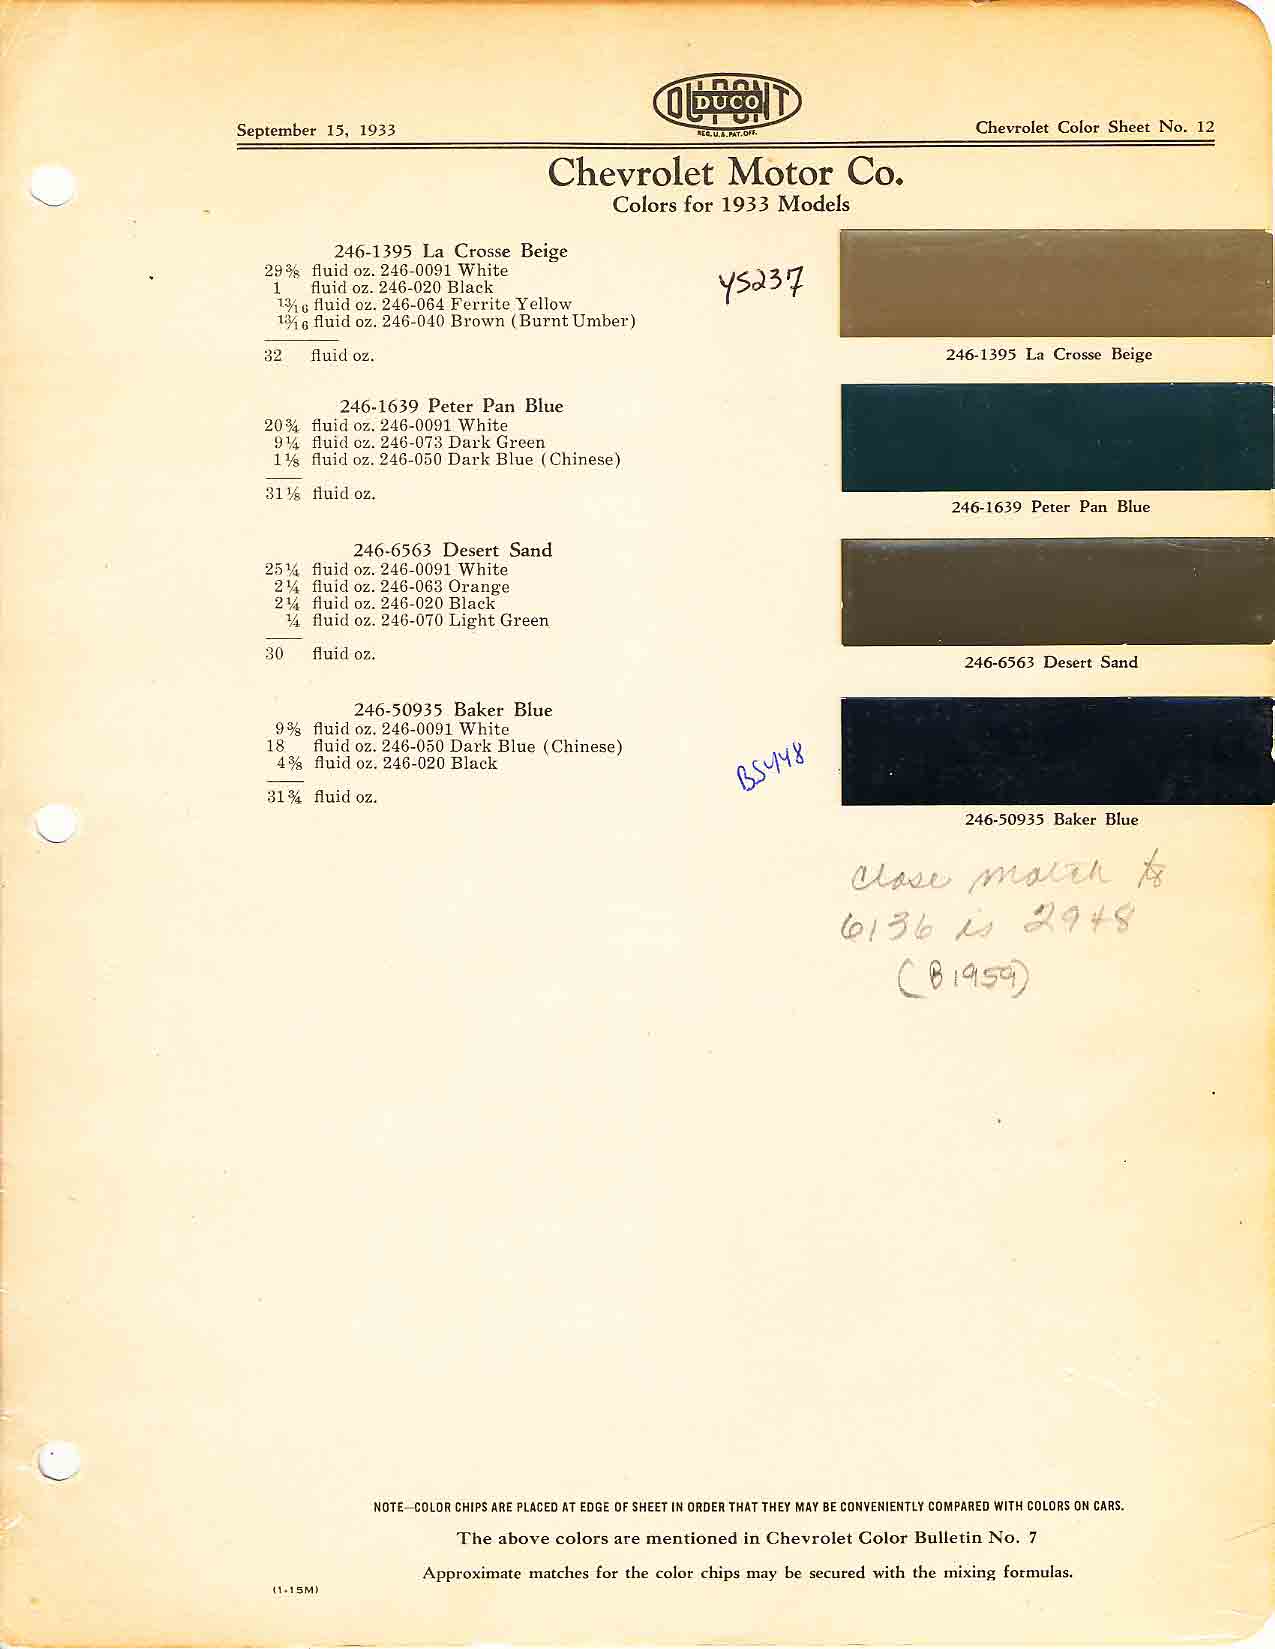 Colors and codes used on Chevrolet Vehicles in 1933